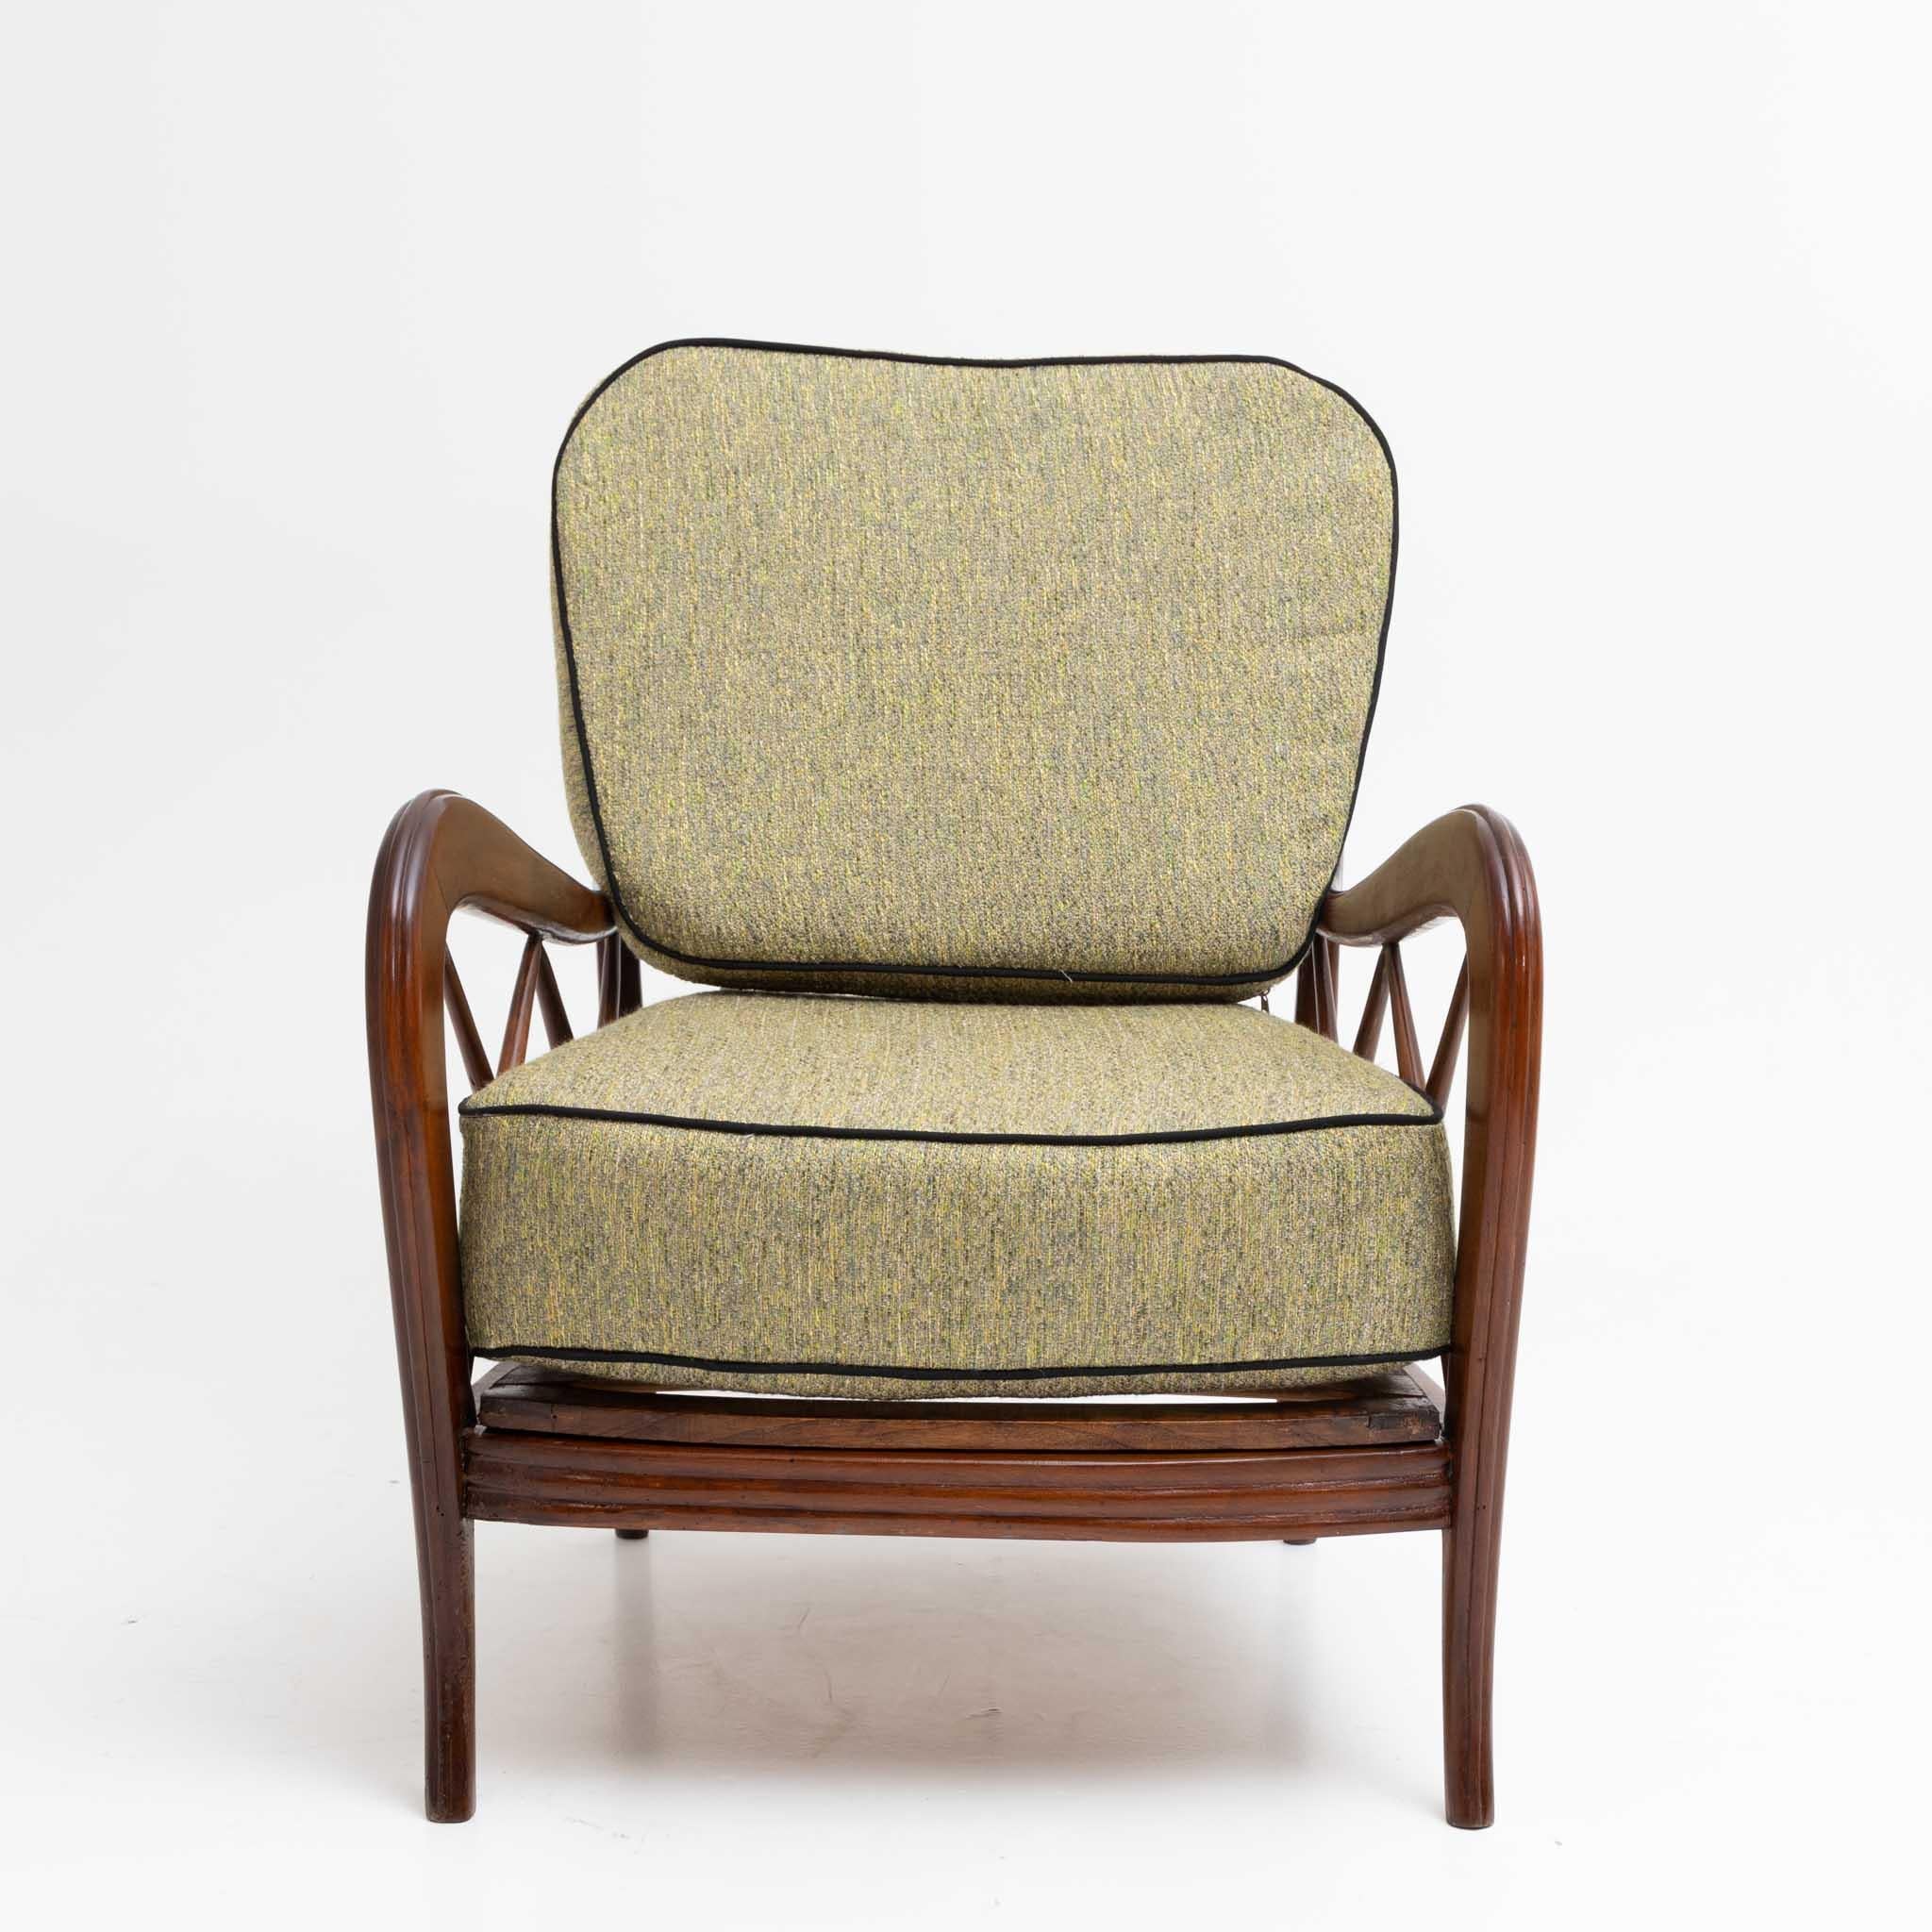 Stained Pair of green Armchairs by Paolo Buffa, polished and reupholstered, Italy, 1940s